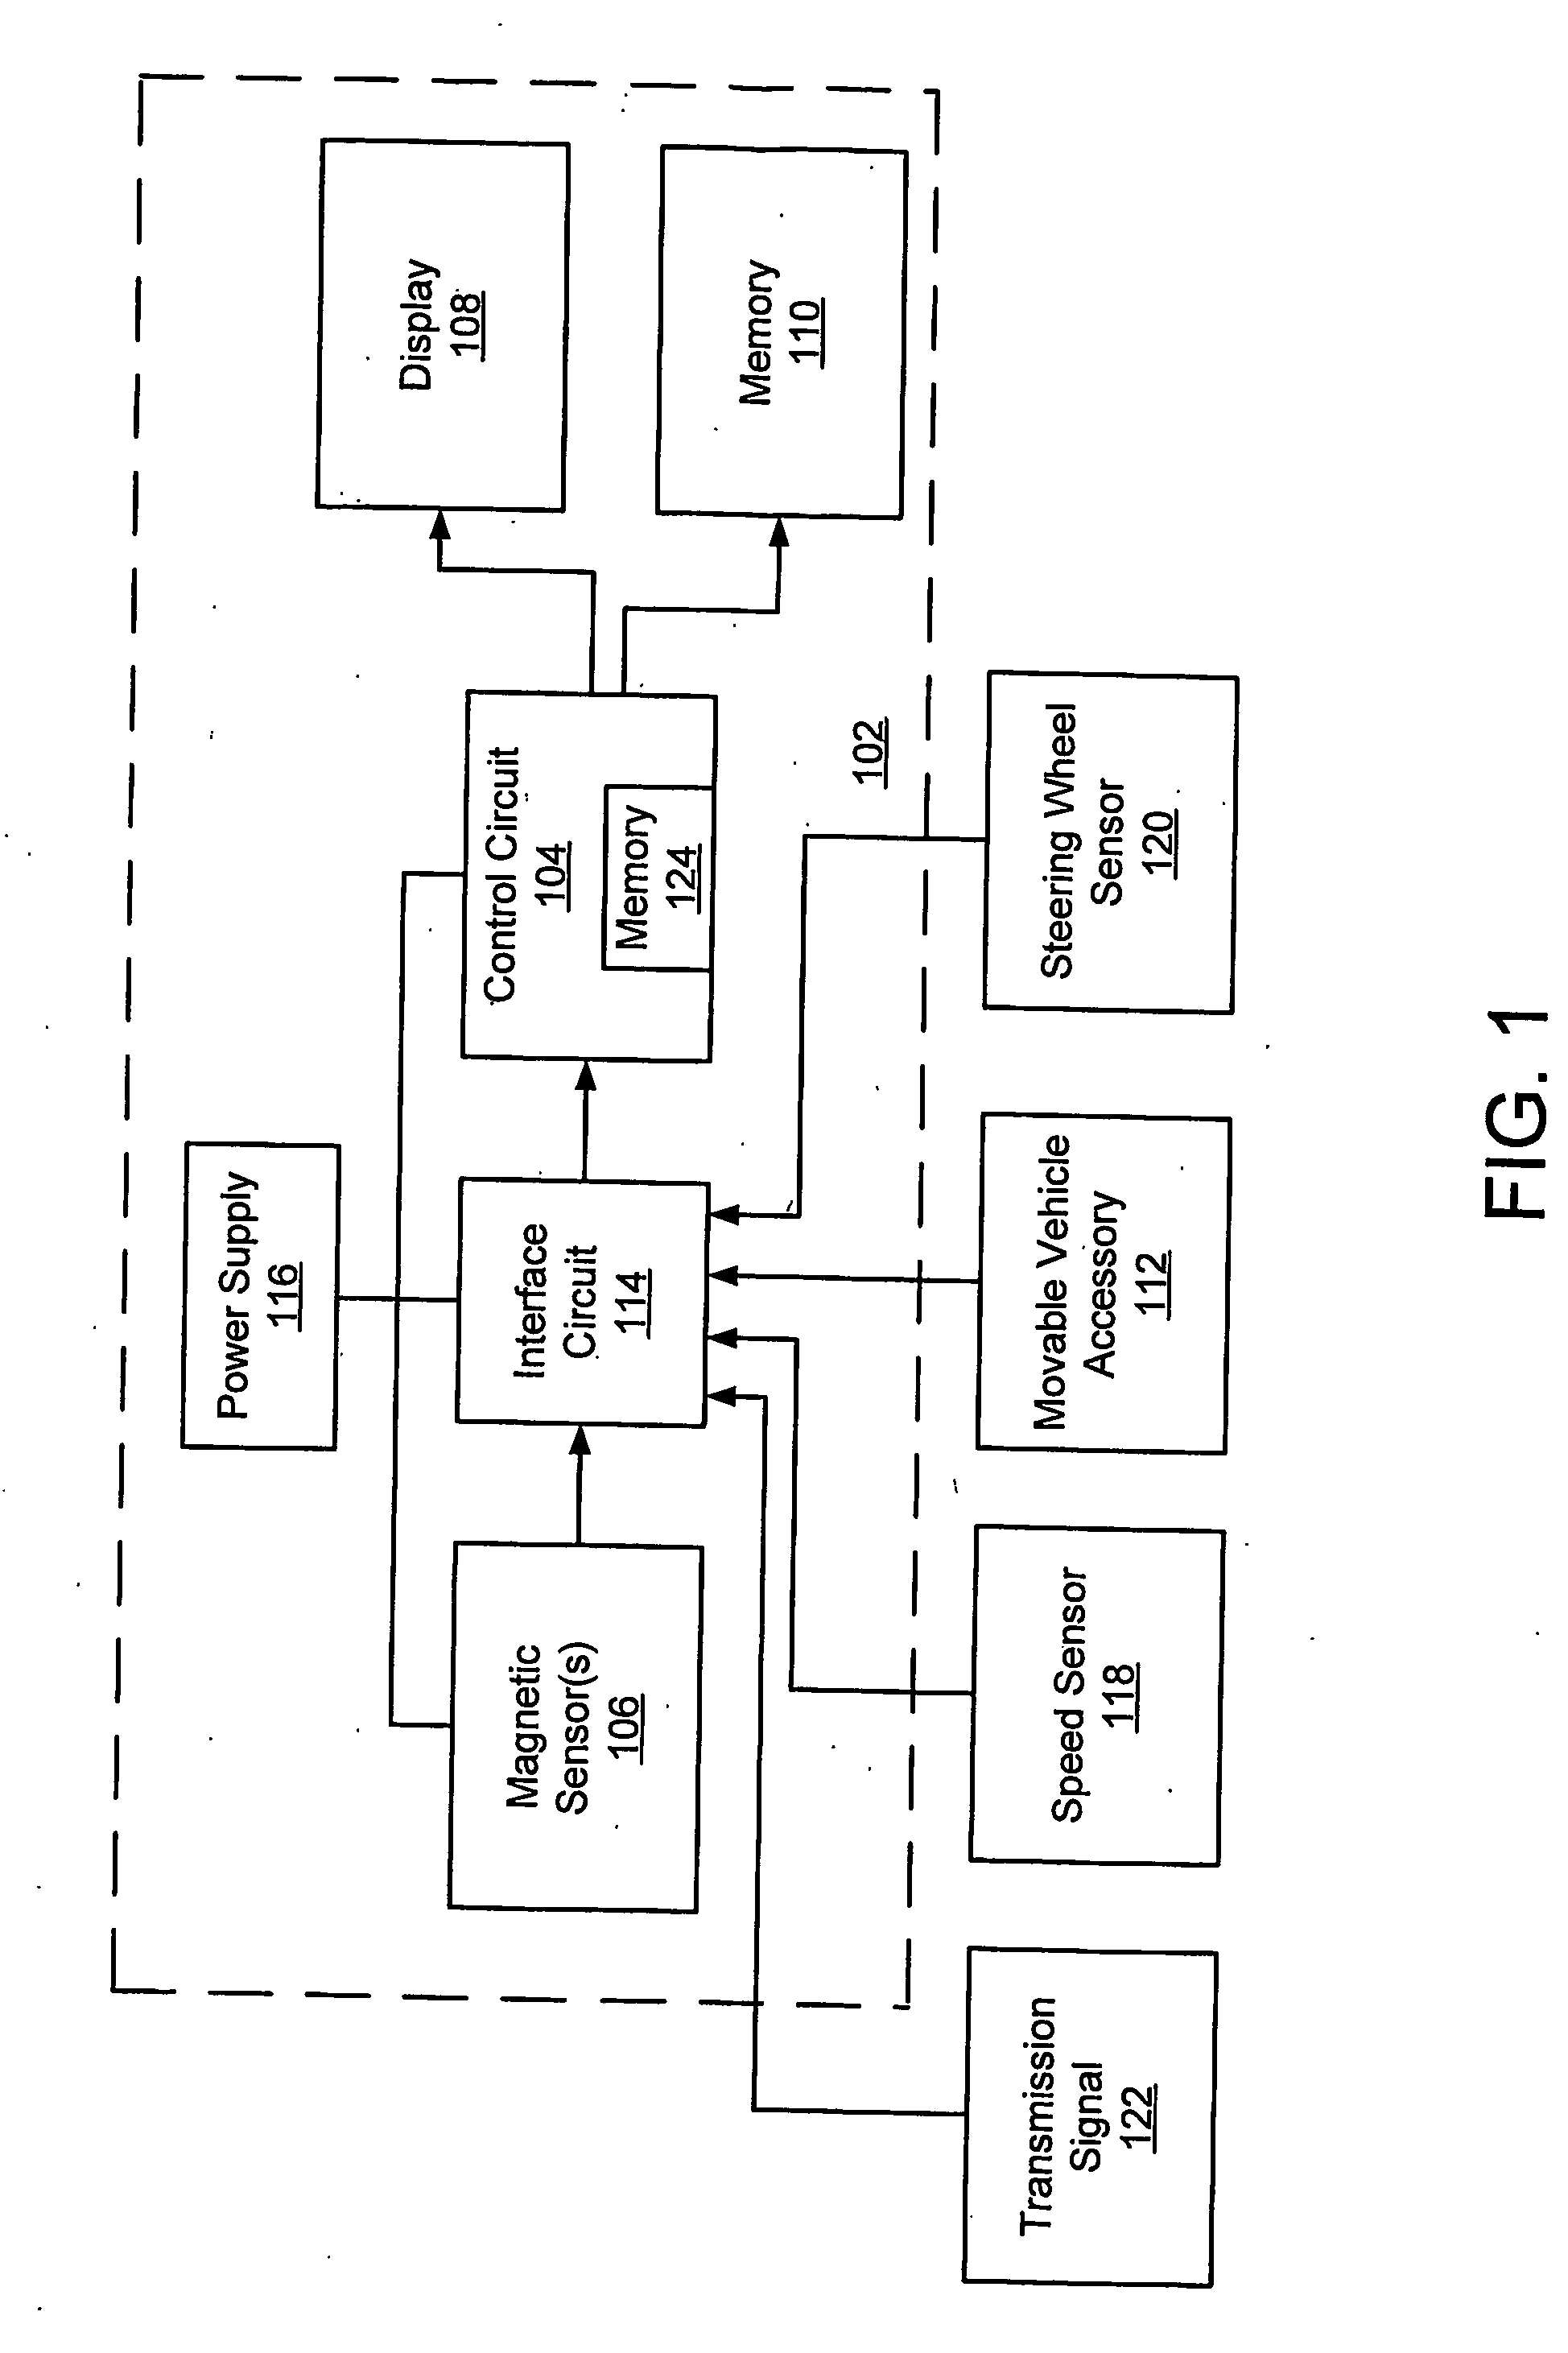 System and method for compensating for magnetic disturbance of a compass by a moveable vehicle accessory